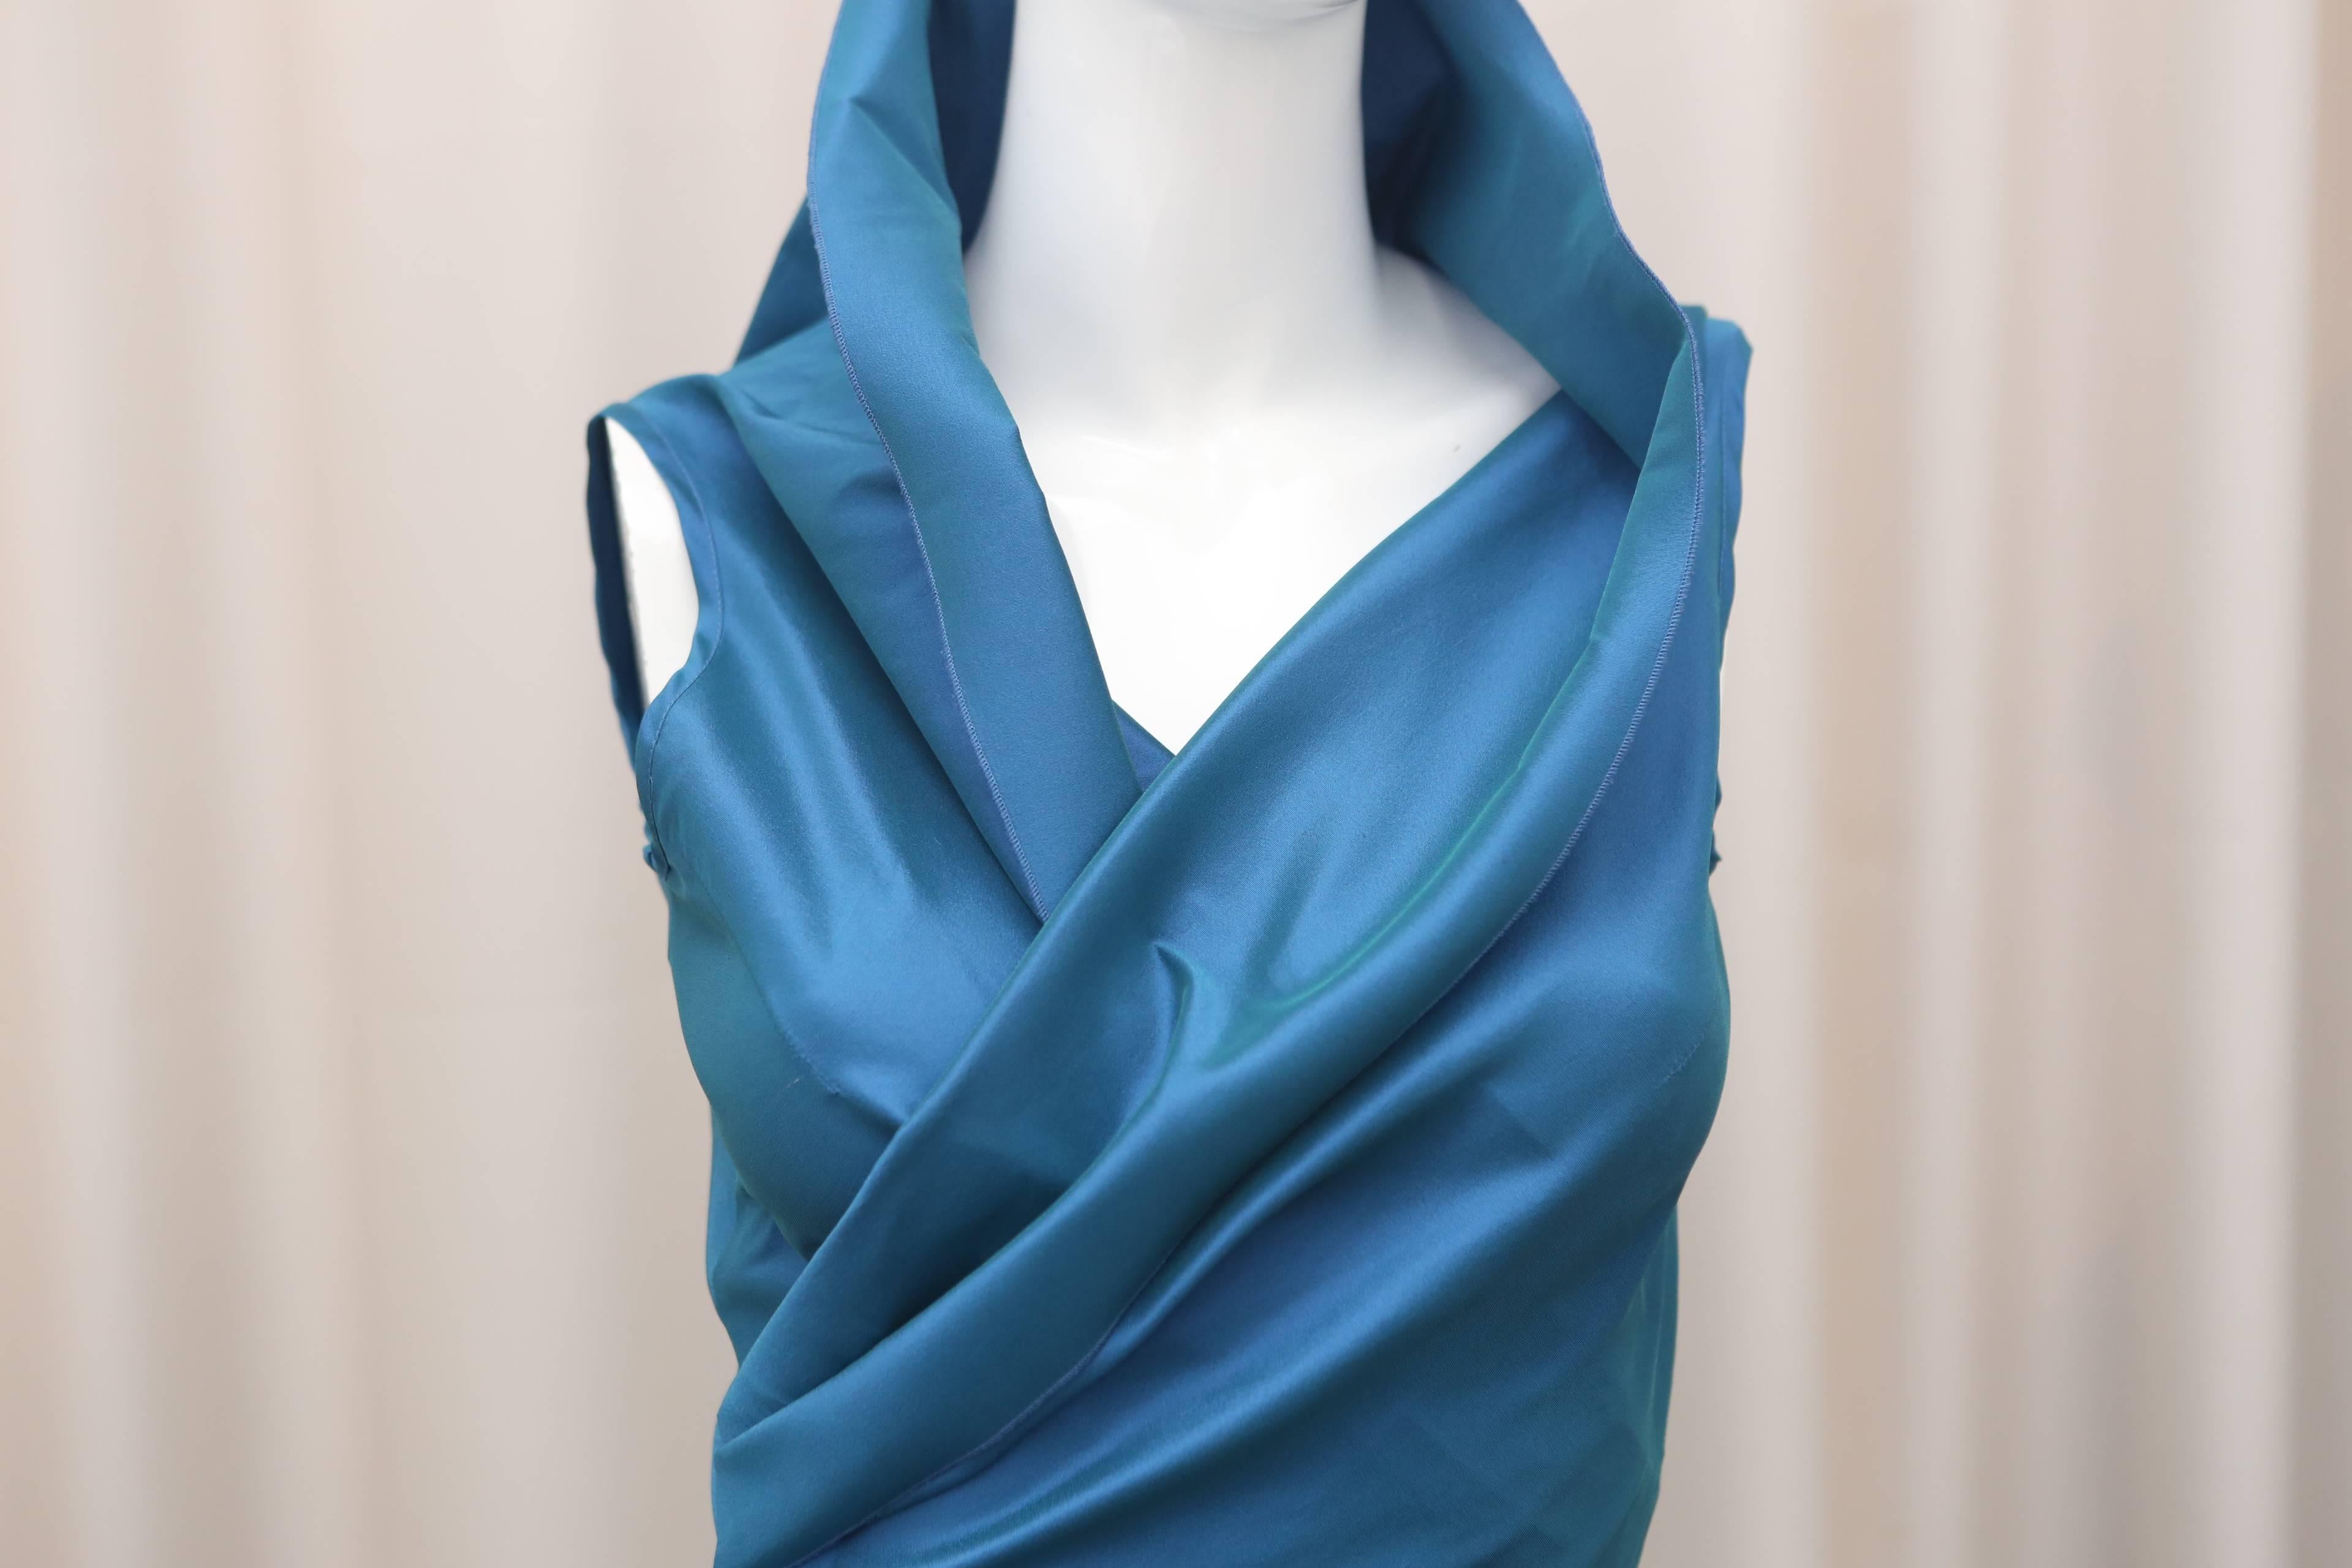 Talbot Runhof sleeveless blue faux-wrap dress.  Slightly irredescent with moveable collar and ruching on back.  

Size not marked, estimated US 2.

58% Polyester
28% Silk
13% Nylon
1% Elastane